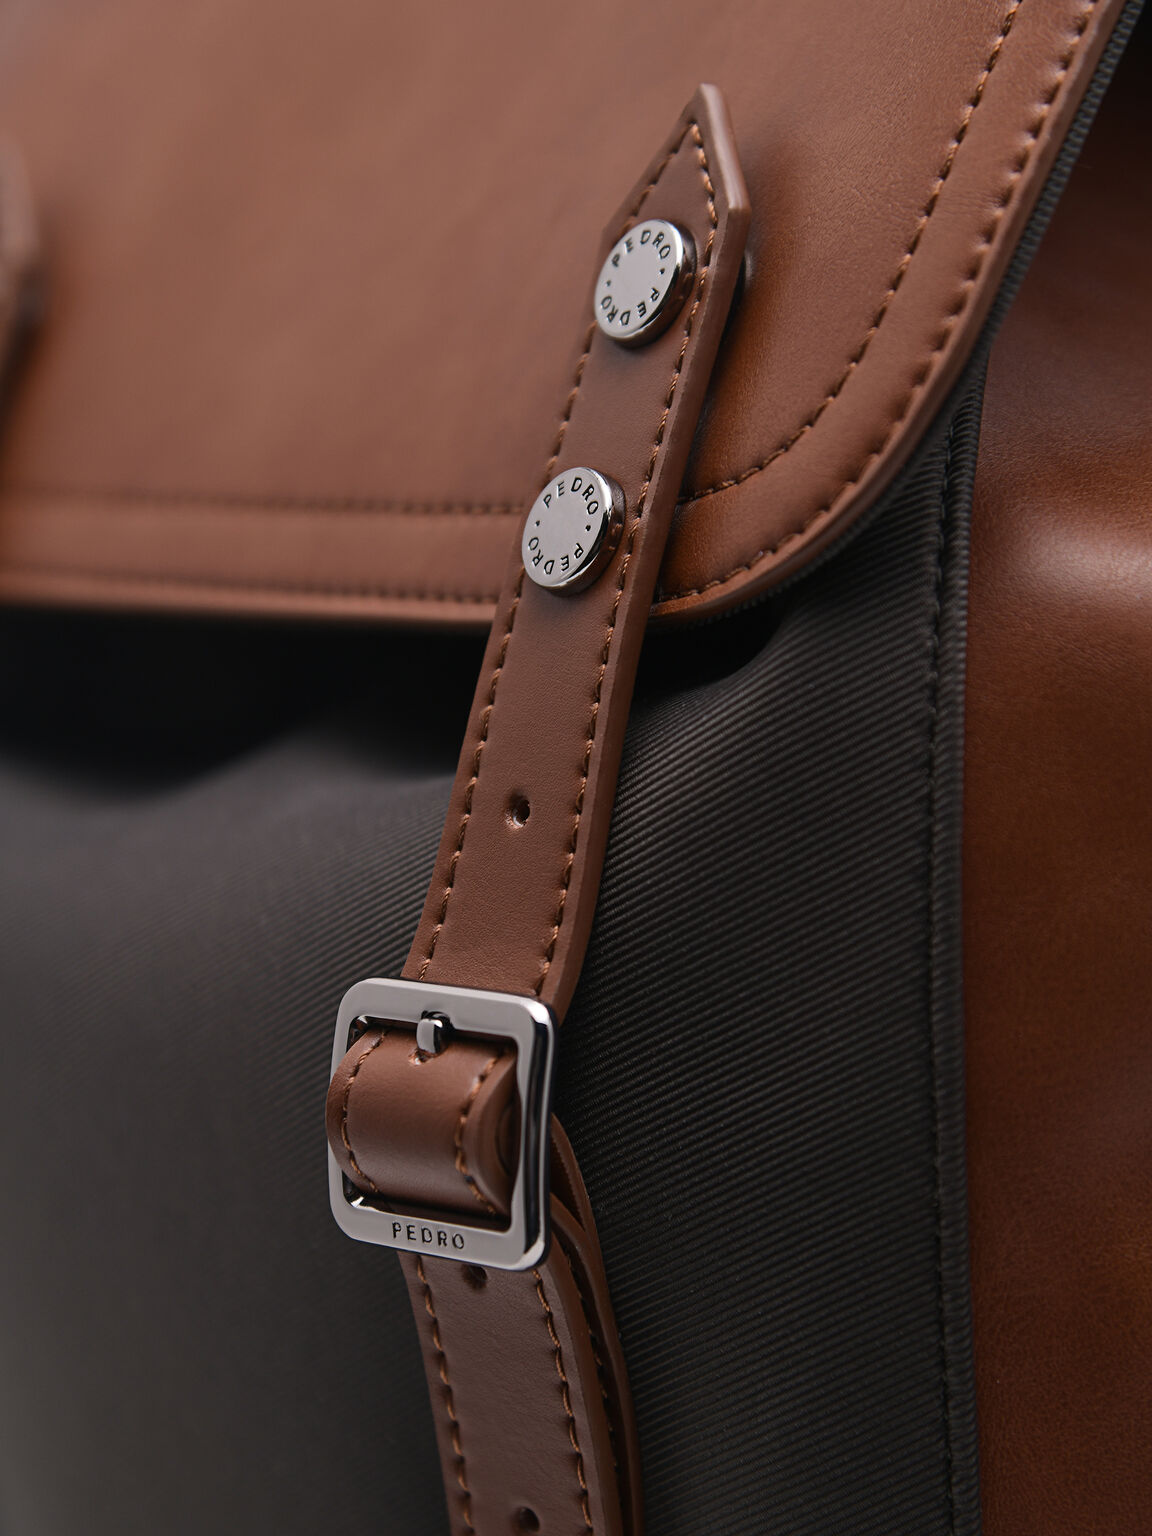 Multi Compartment Backpack with Synthetic Leather Lining, Cognac